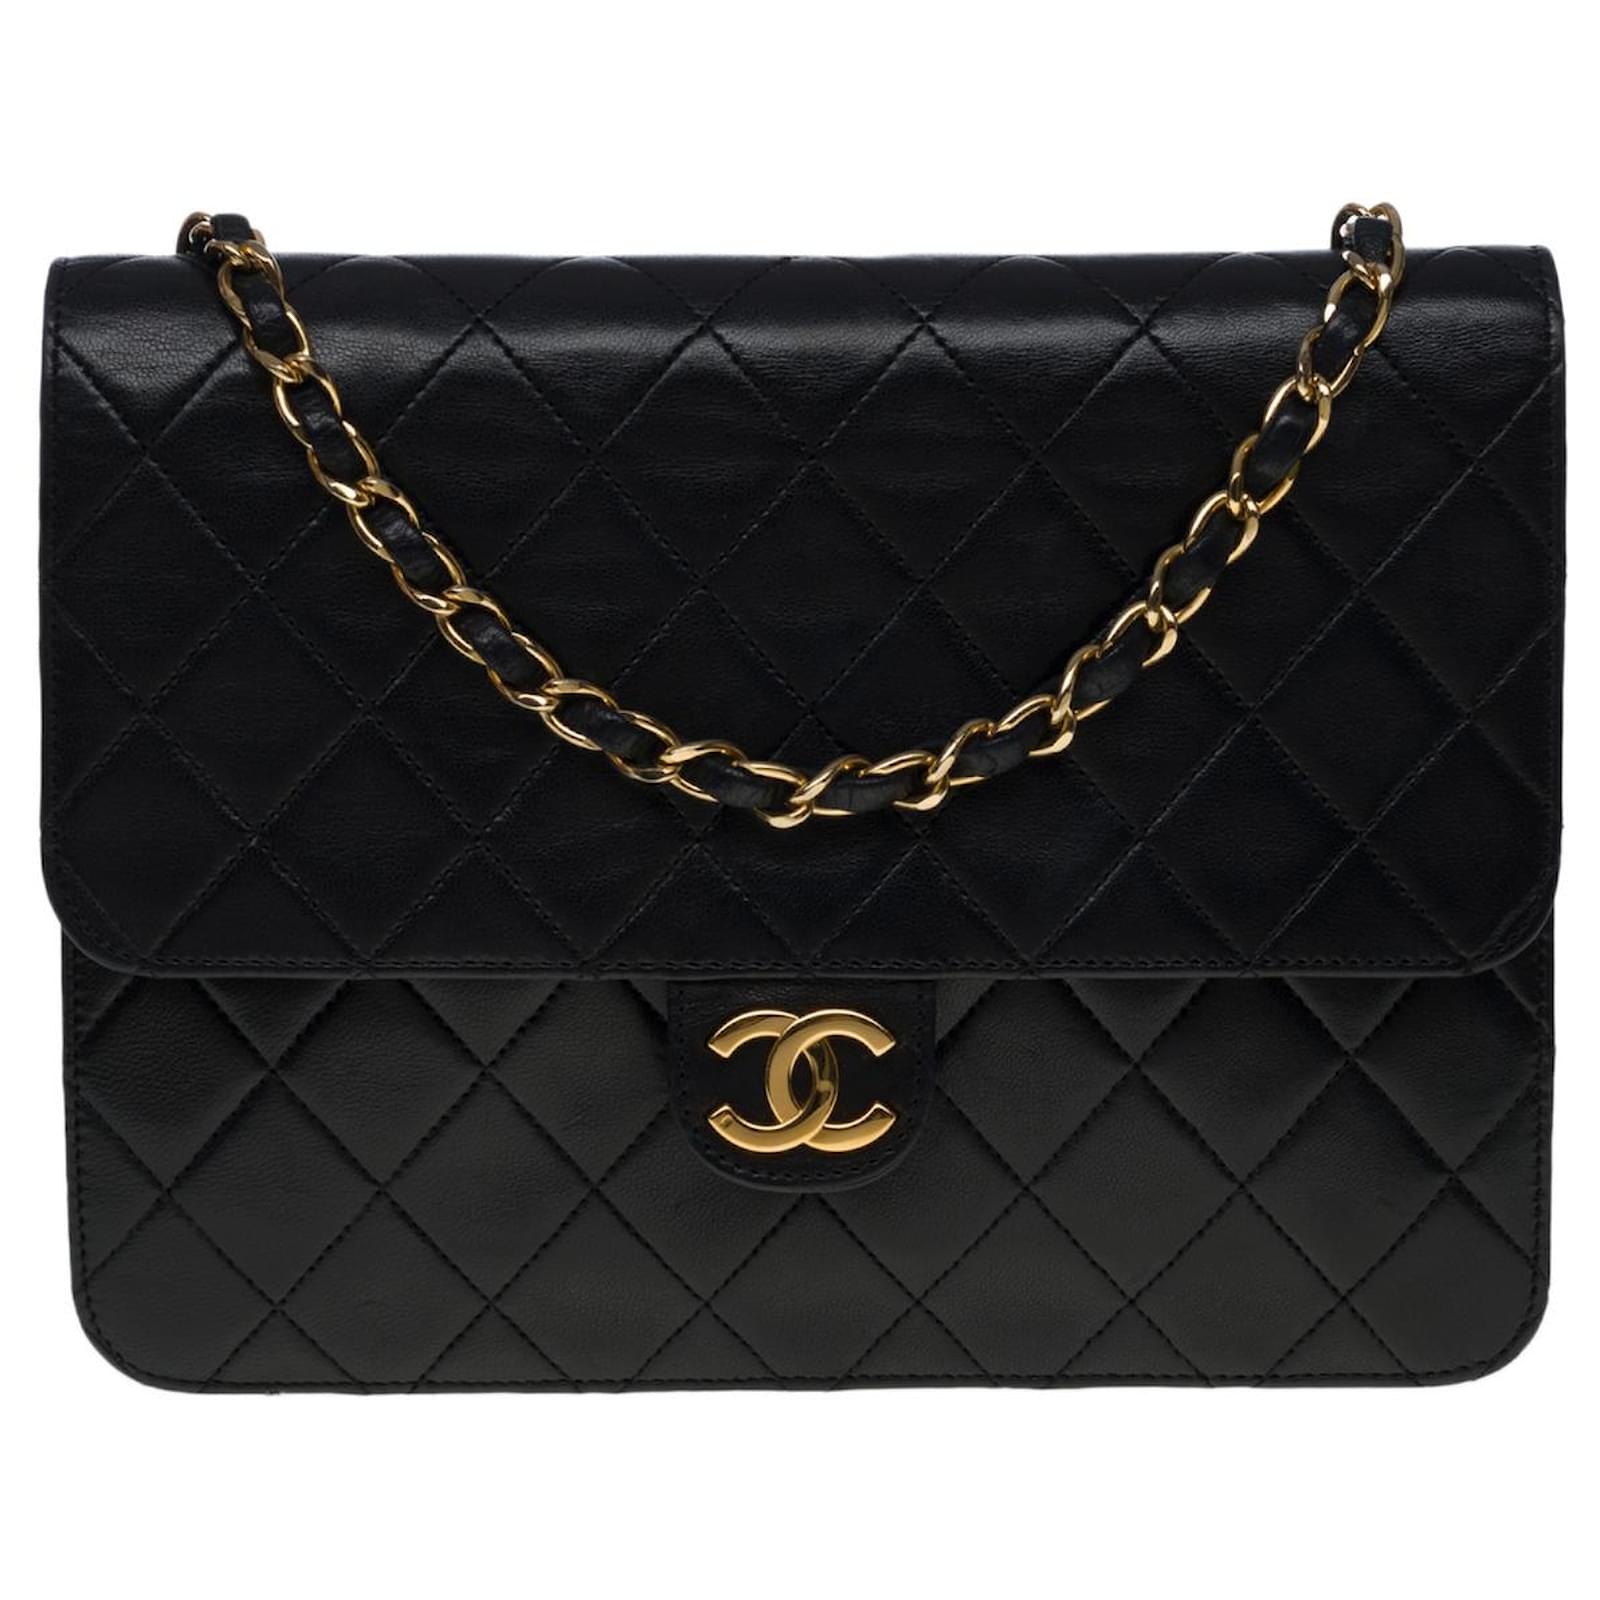 Timeless/classique leather crossbody bag Chanel Black in Leather